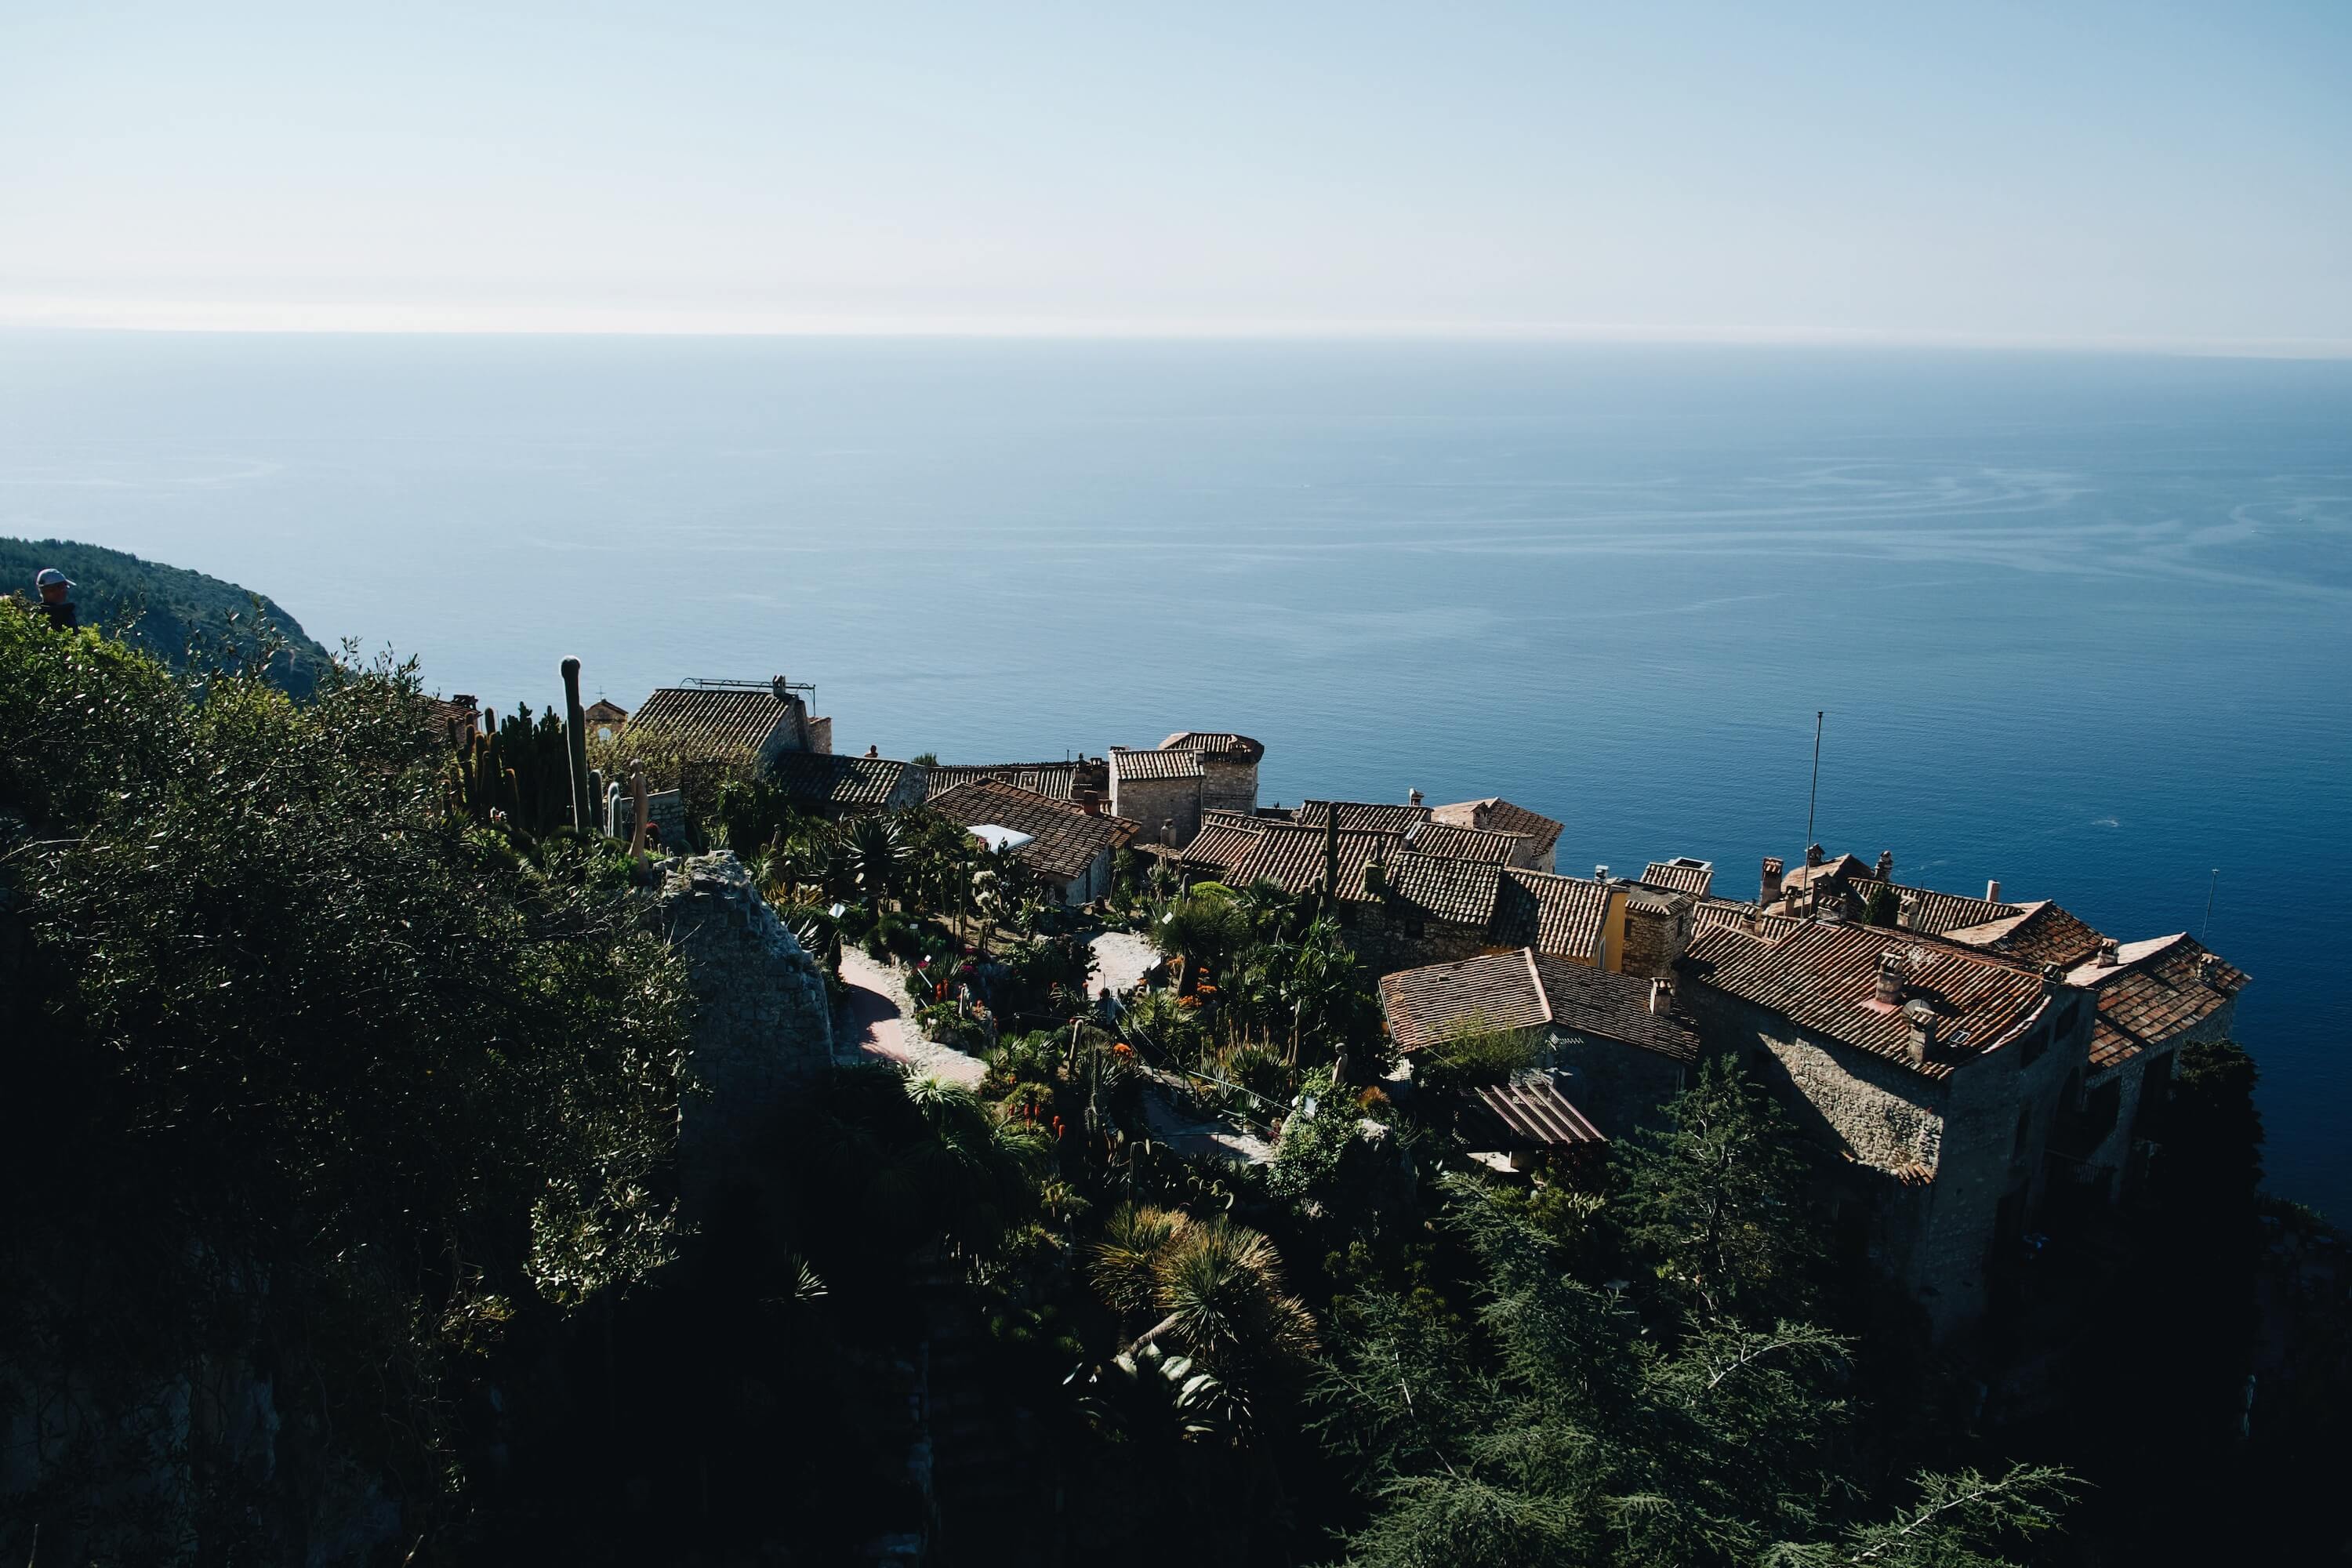 A view of Eze village from the gardens